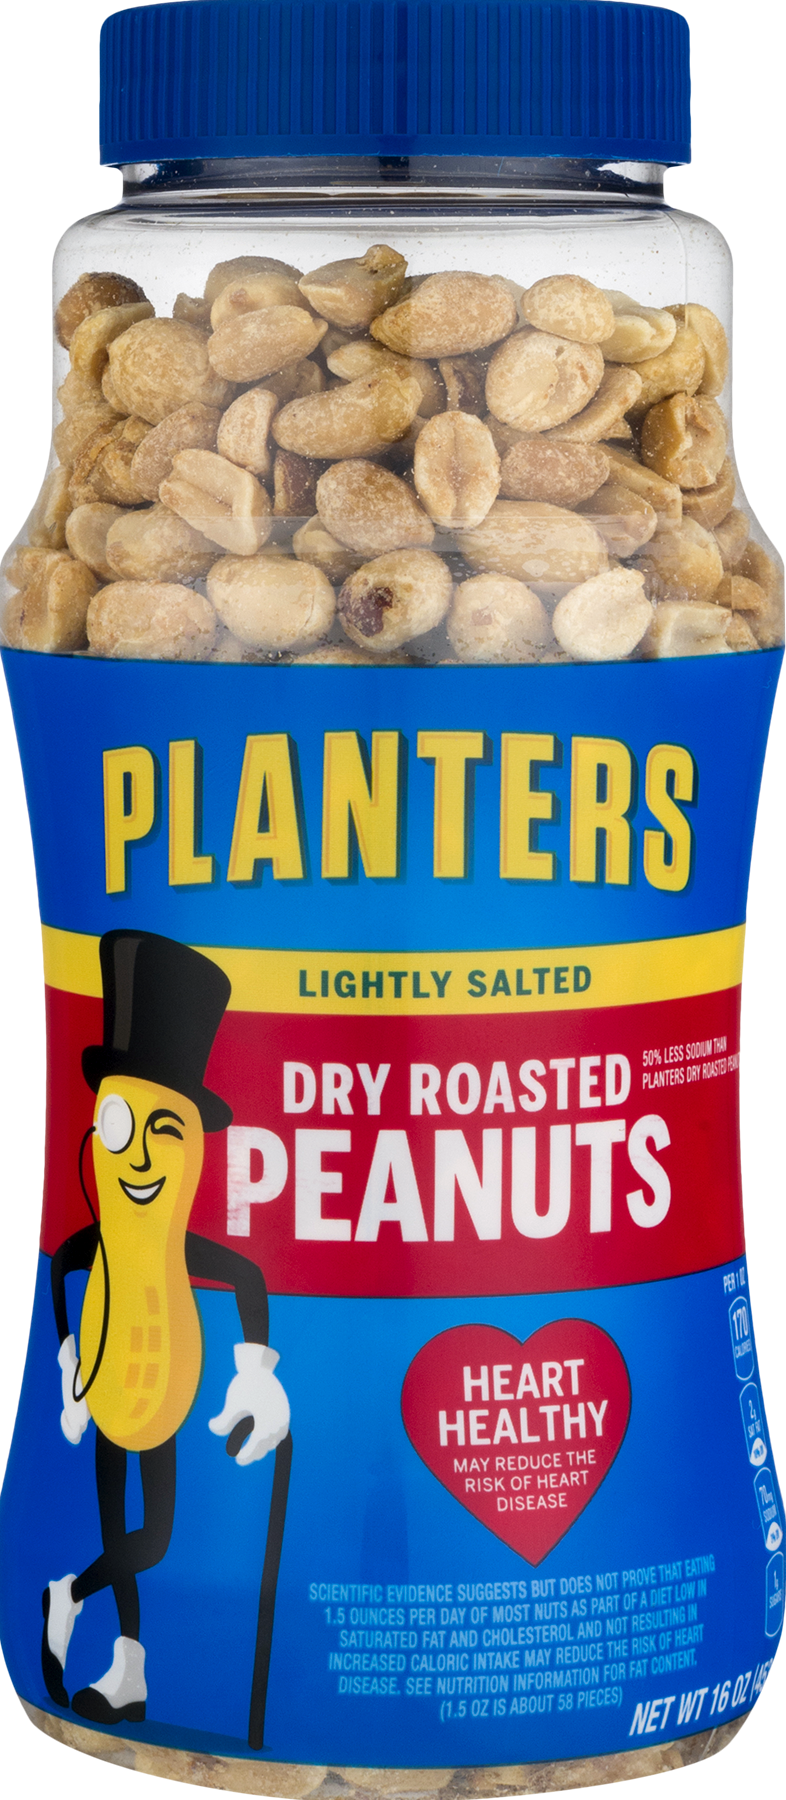 Planters Lightly Salted Dry Roasted Peanuts Product Image PNG